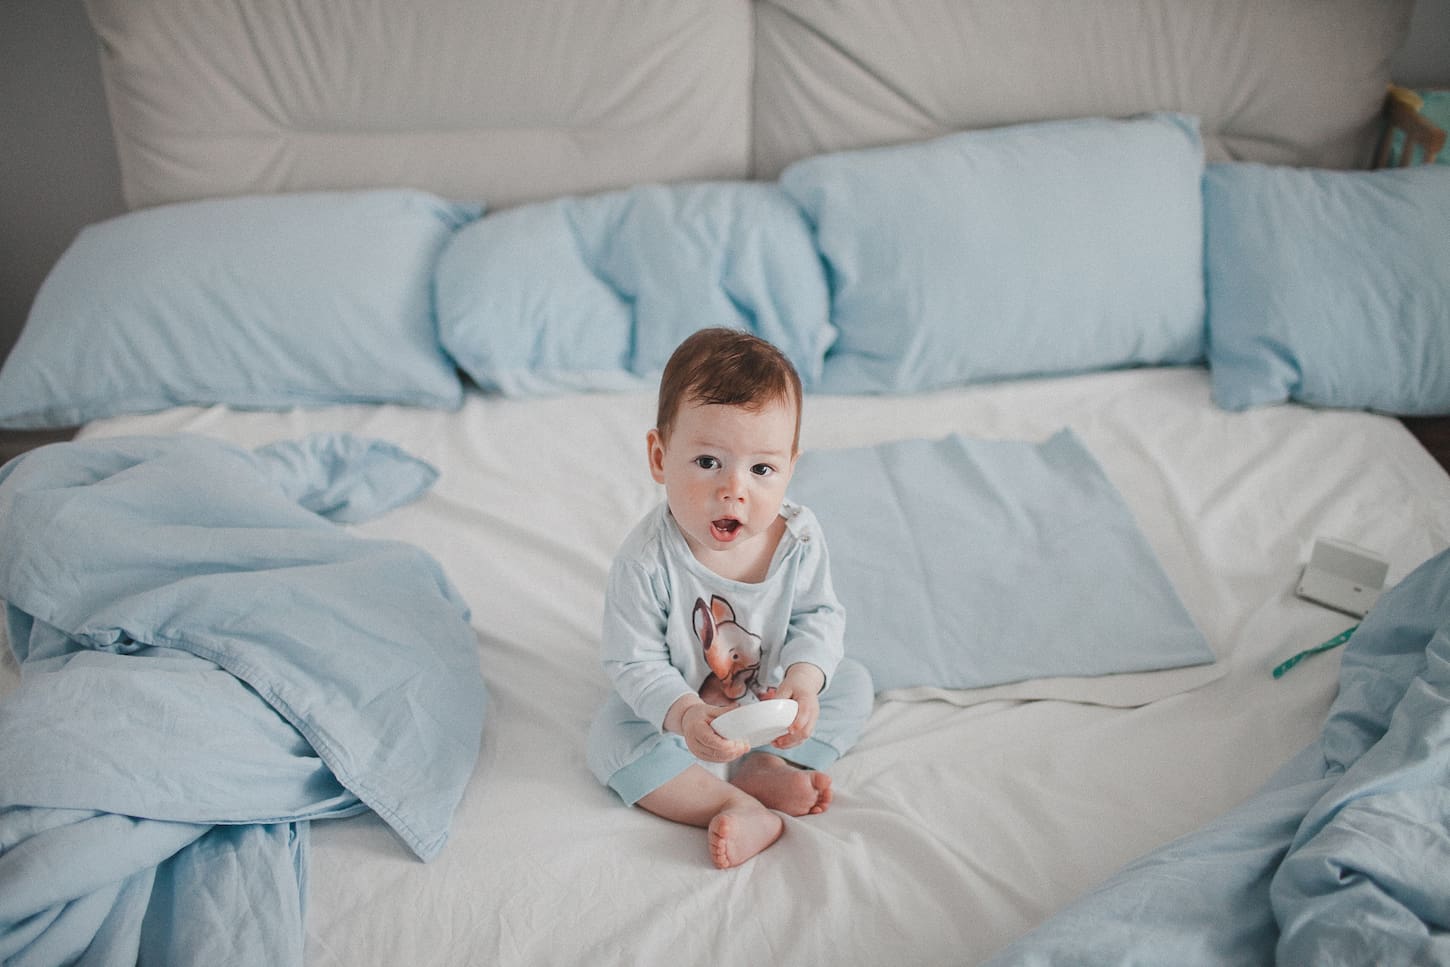 An image of a baby boy sitting in a spacious bed.